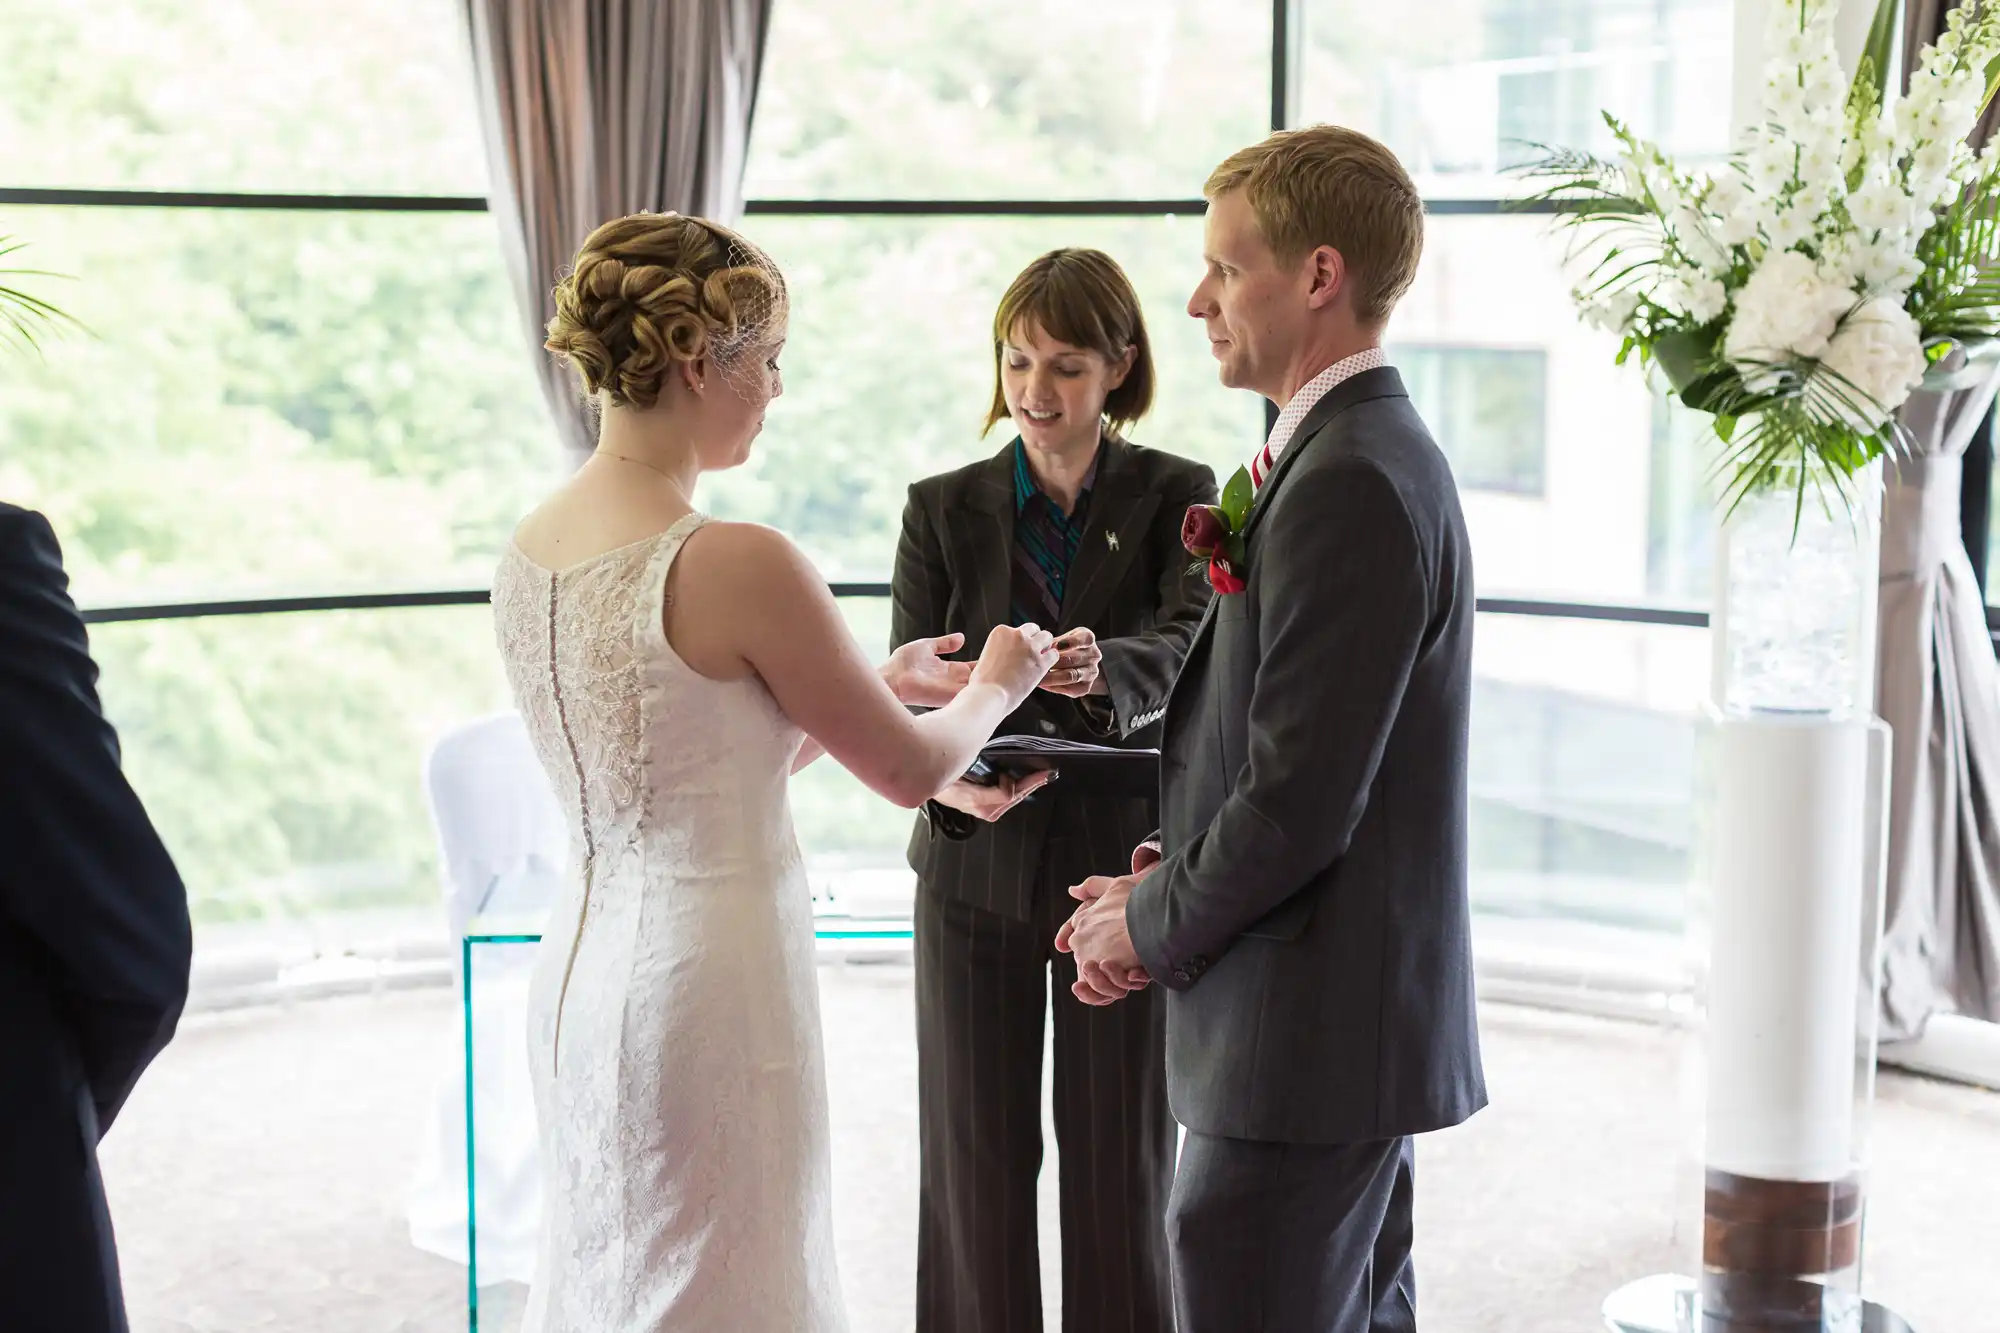 Bride and groom exchanging rings during a wedding ceremony, officiated by a woman, in a room with large windows overlooking greenery.